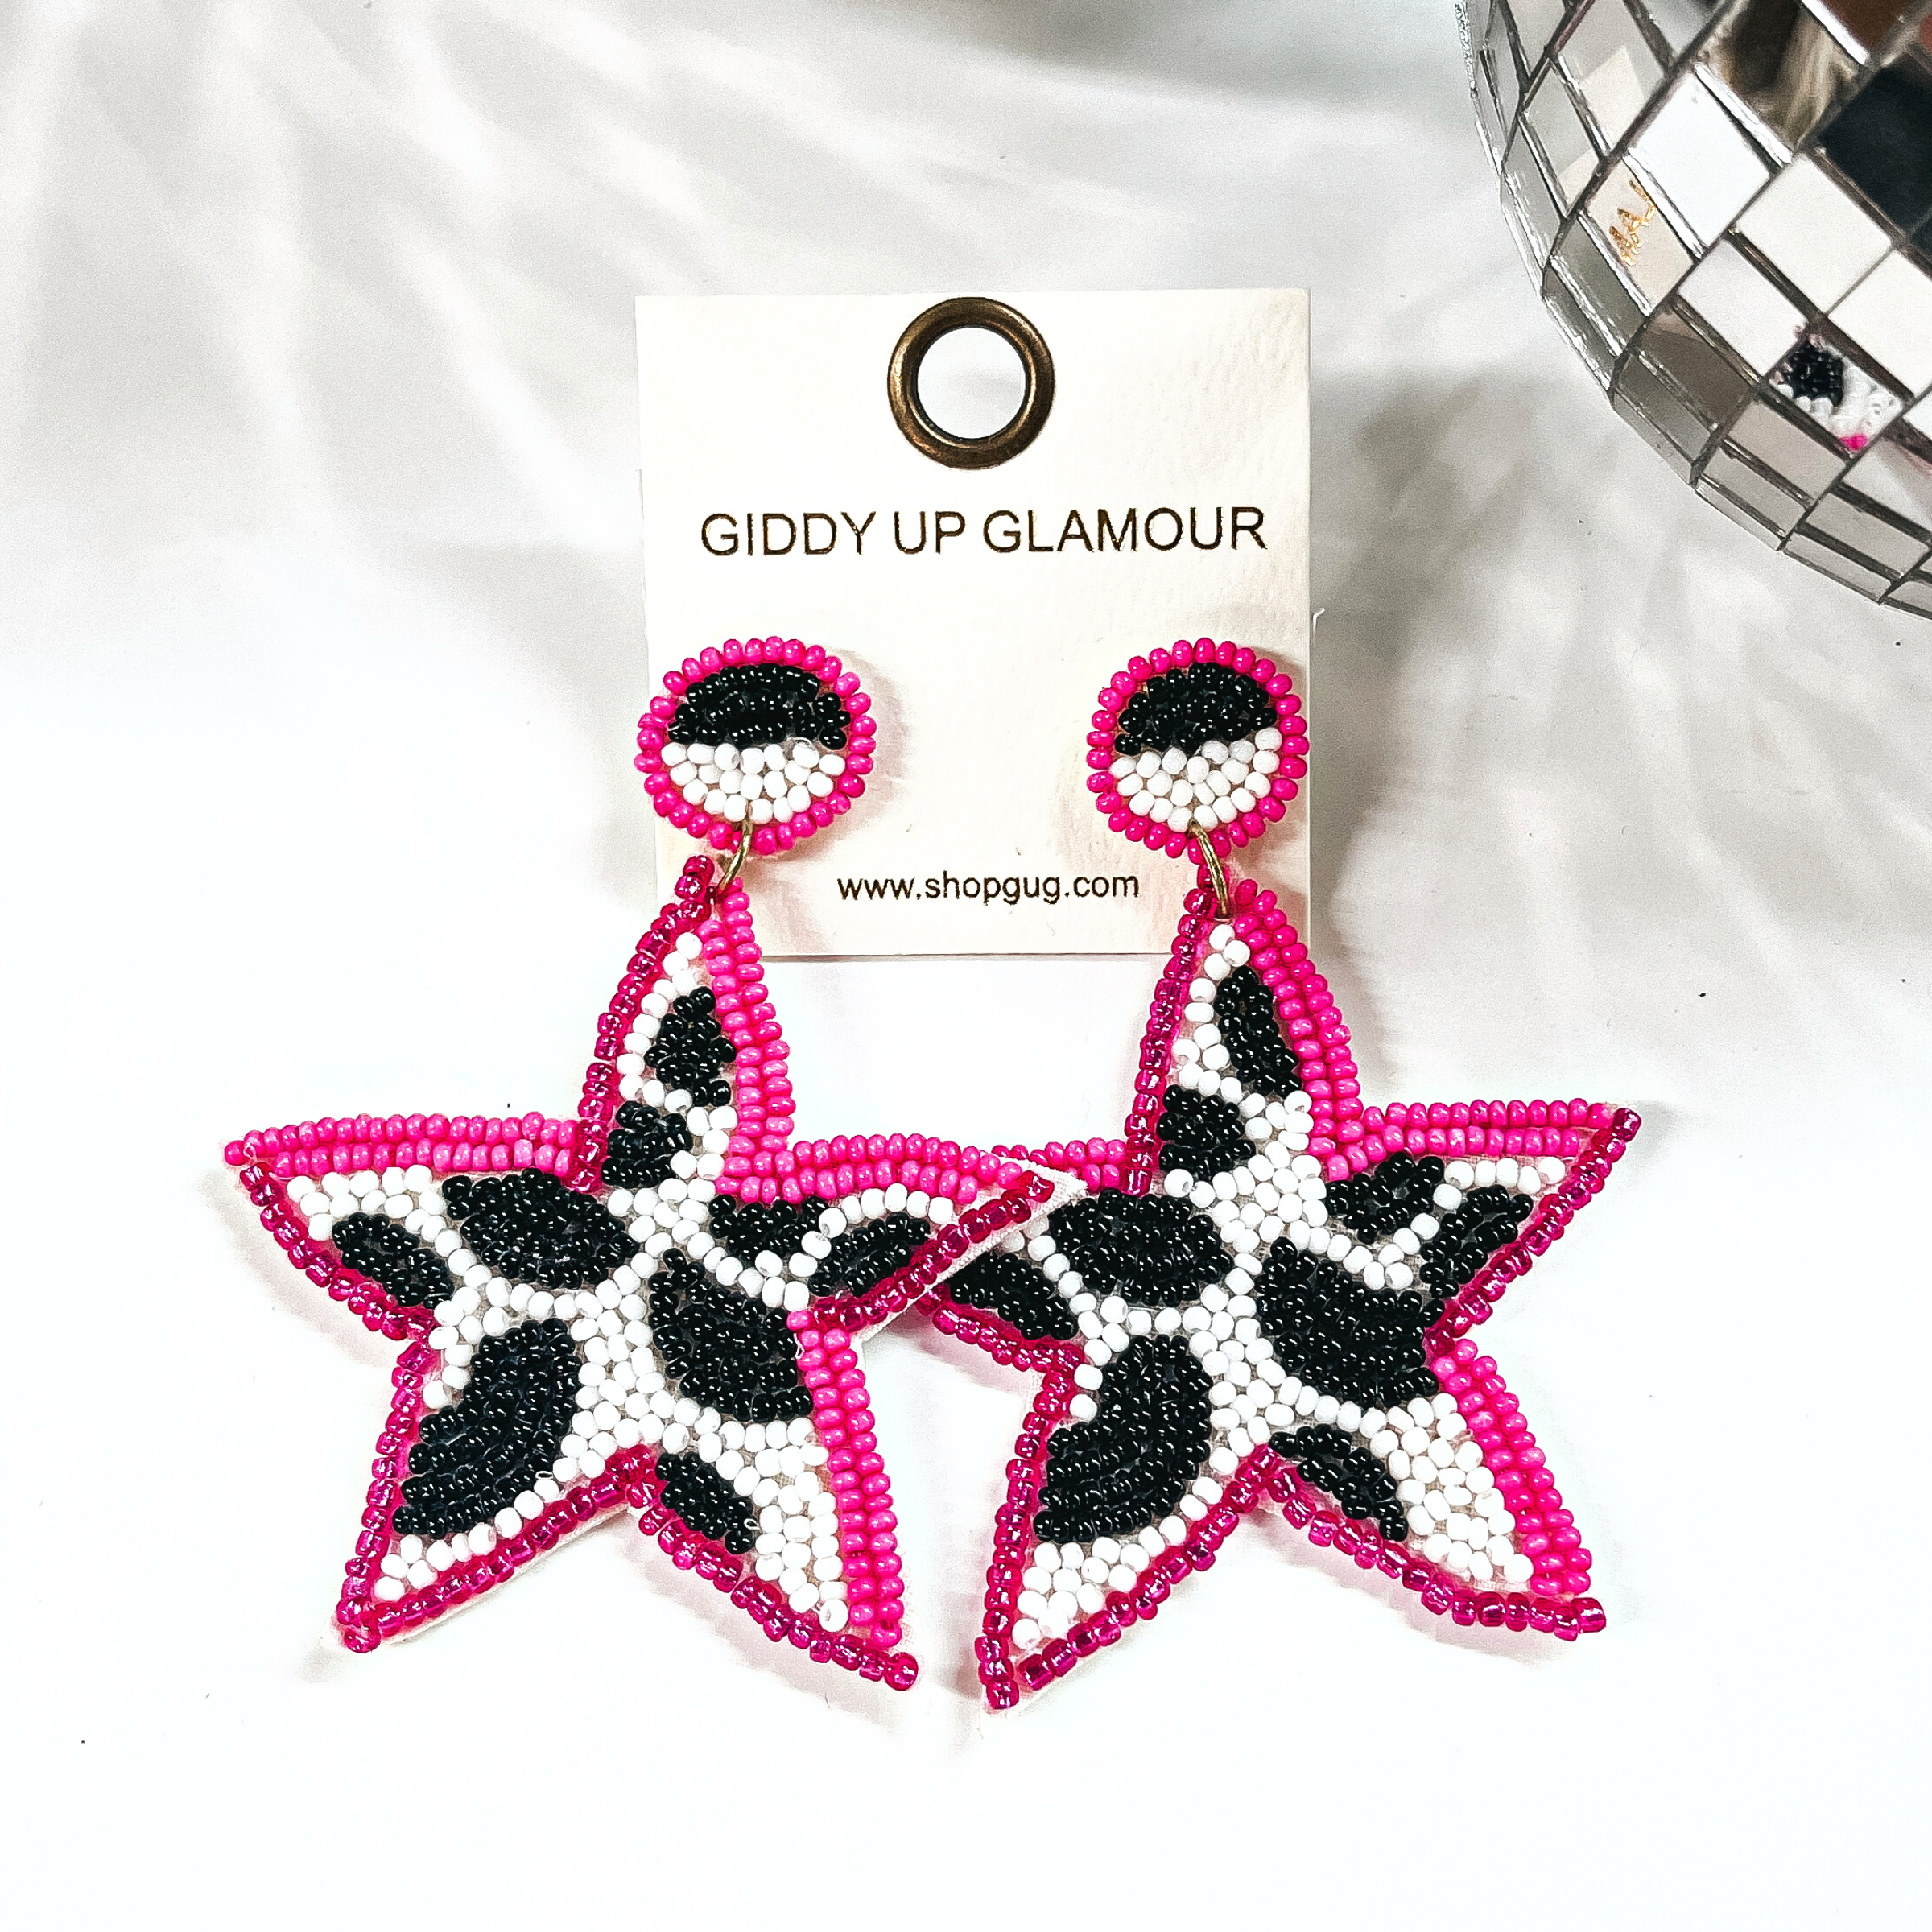 These are beaded star shape earrings in pink, black, and white. The center  is in black and white cow print, and pink beads all around. The post  back is half black and white, with pink beads all around as well. These  earrings are placed on an ivory Giddy Up Glamour earring card. These earrings  are taken on a white background with a disco ball in the side as decor.